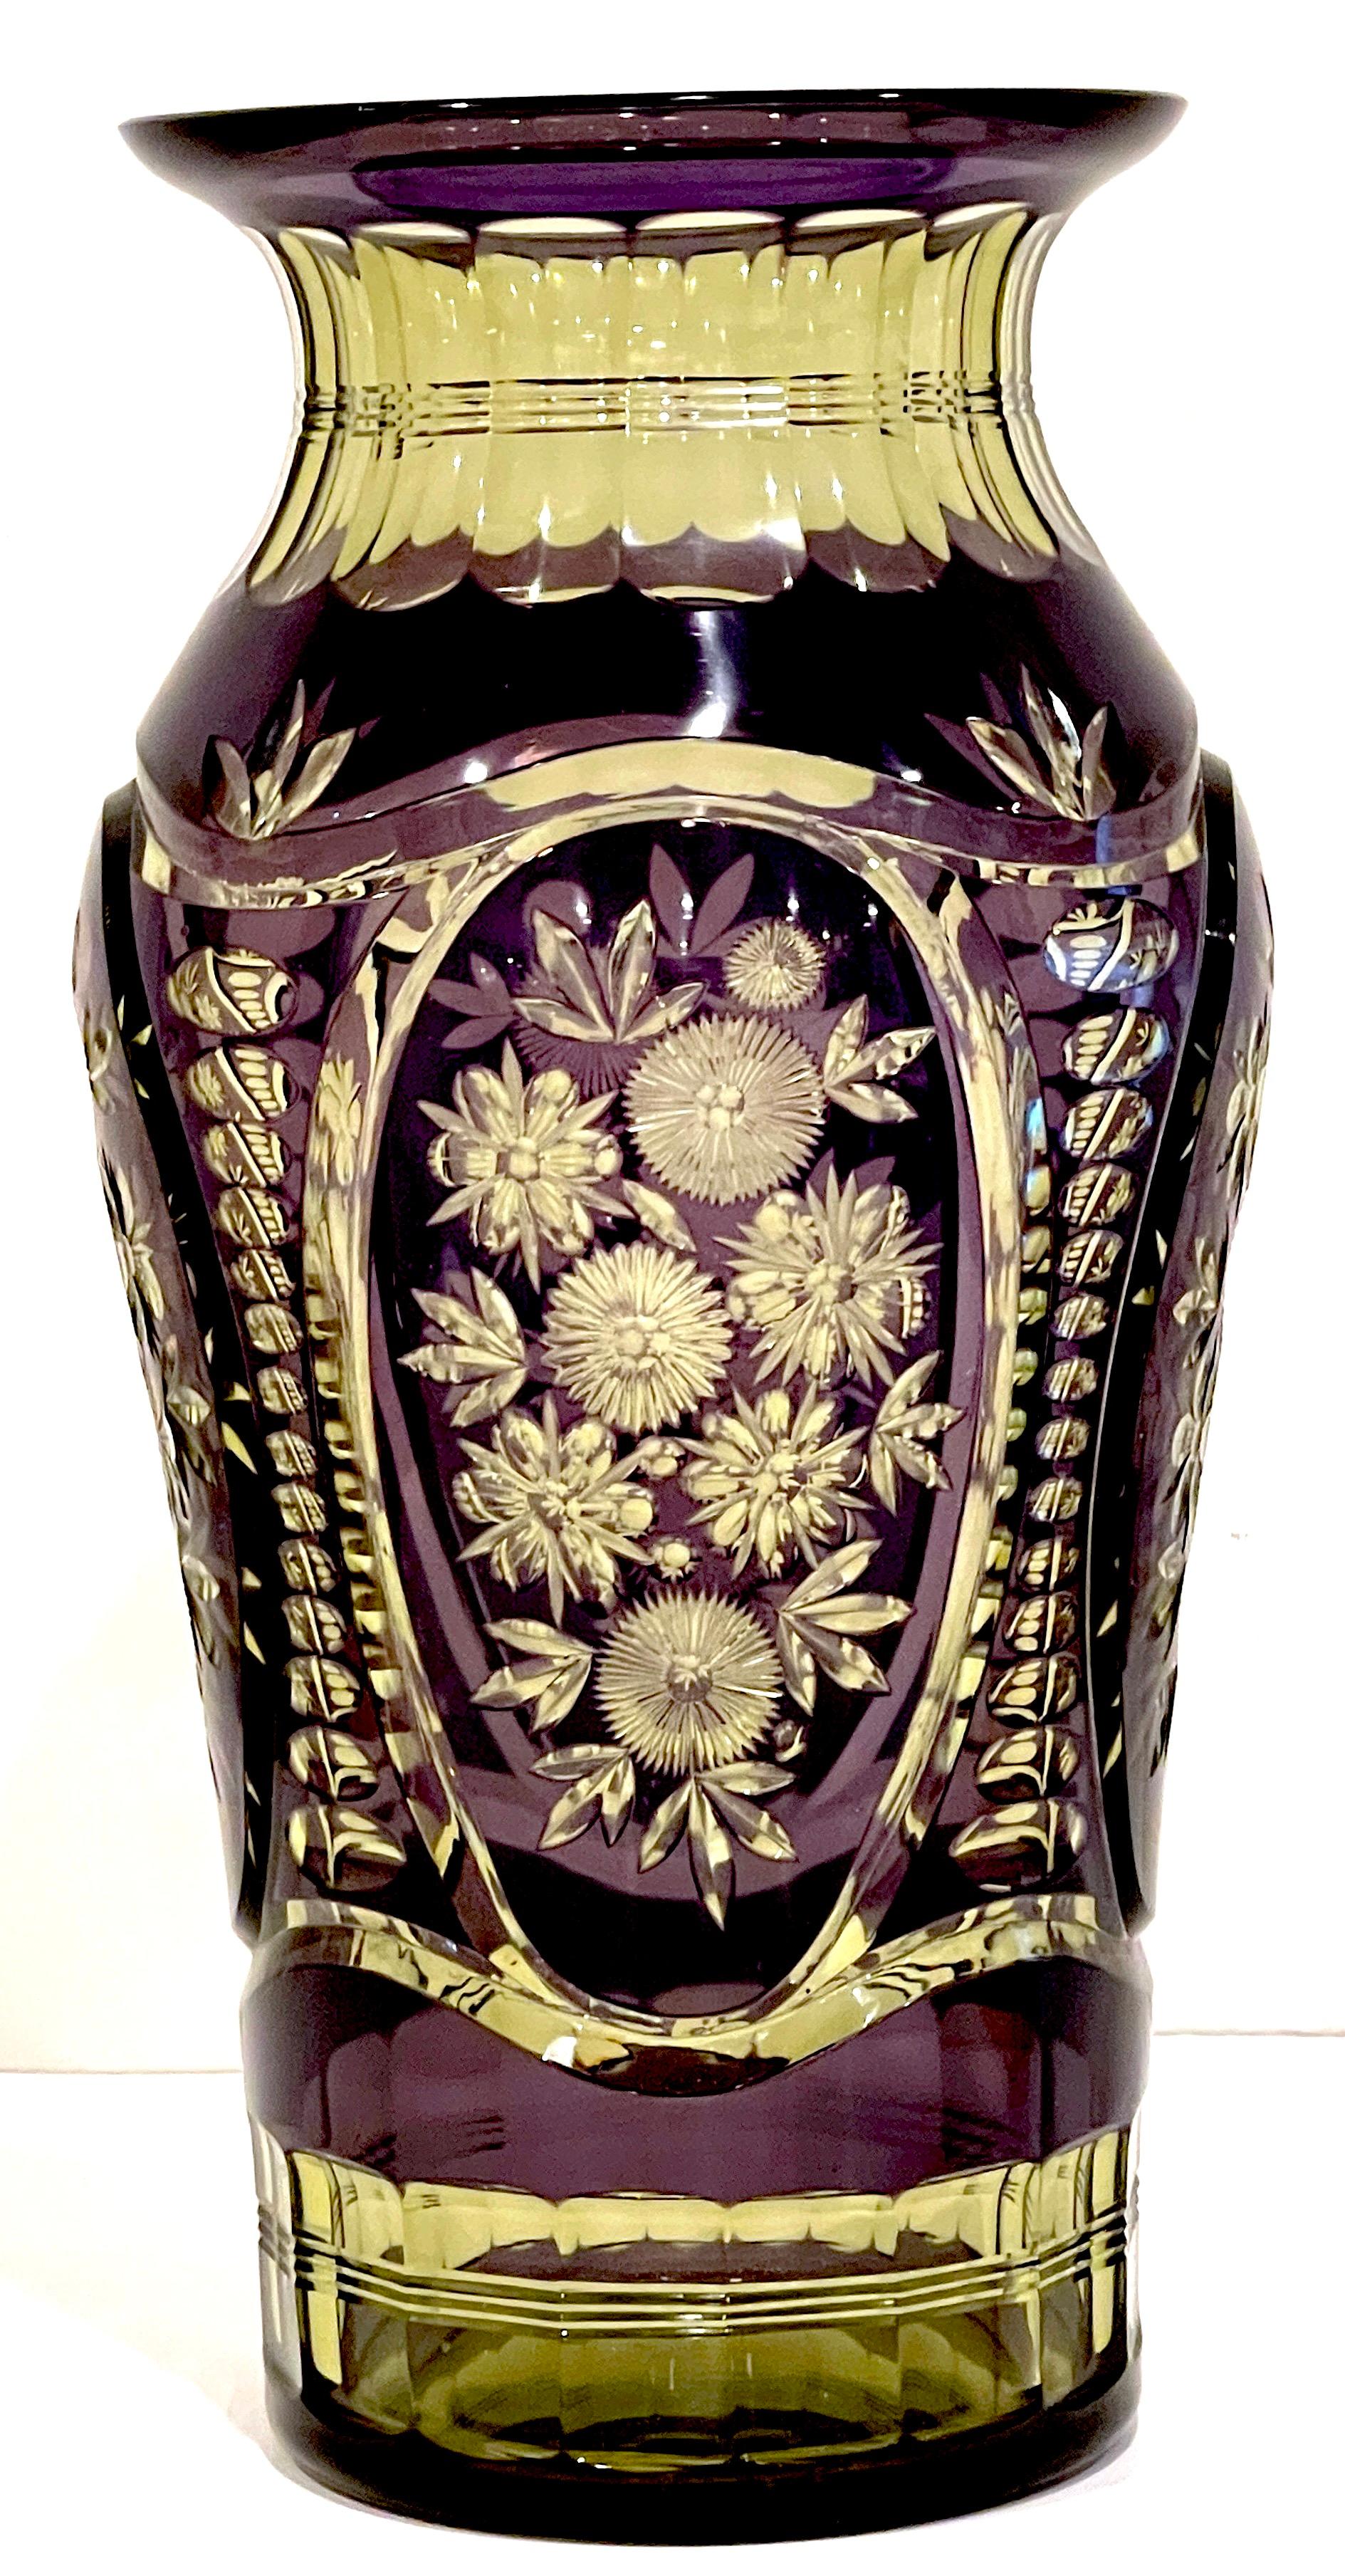 Art Deco Floral Engraved Amethyst & Uranium Crystal vase by Val St. Lambet
Belgium, Circa 1920s
Attributed: Val Saint Lambert is a Belgian crystal glassware manufacturer, founded in 1826, It has the royal warrant of King Albert II.

An